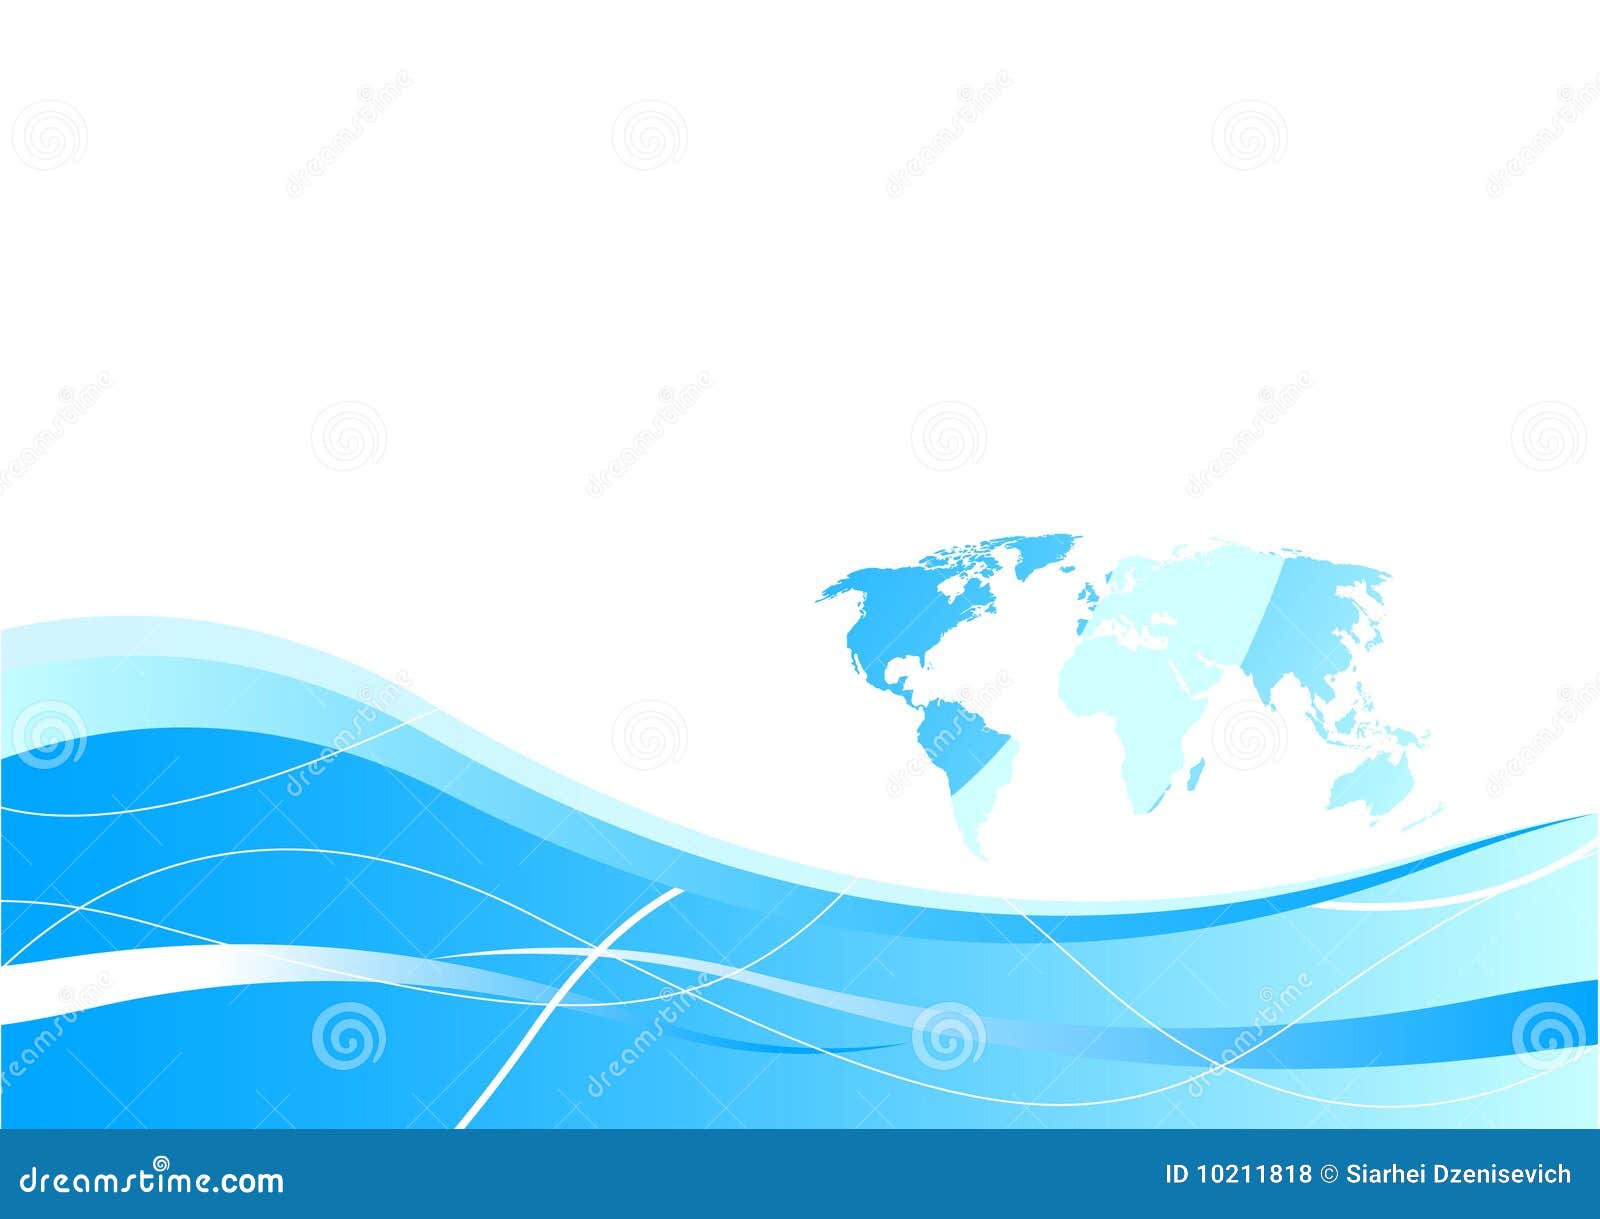 business card template - global concept in blue